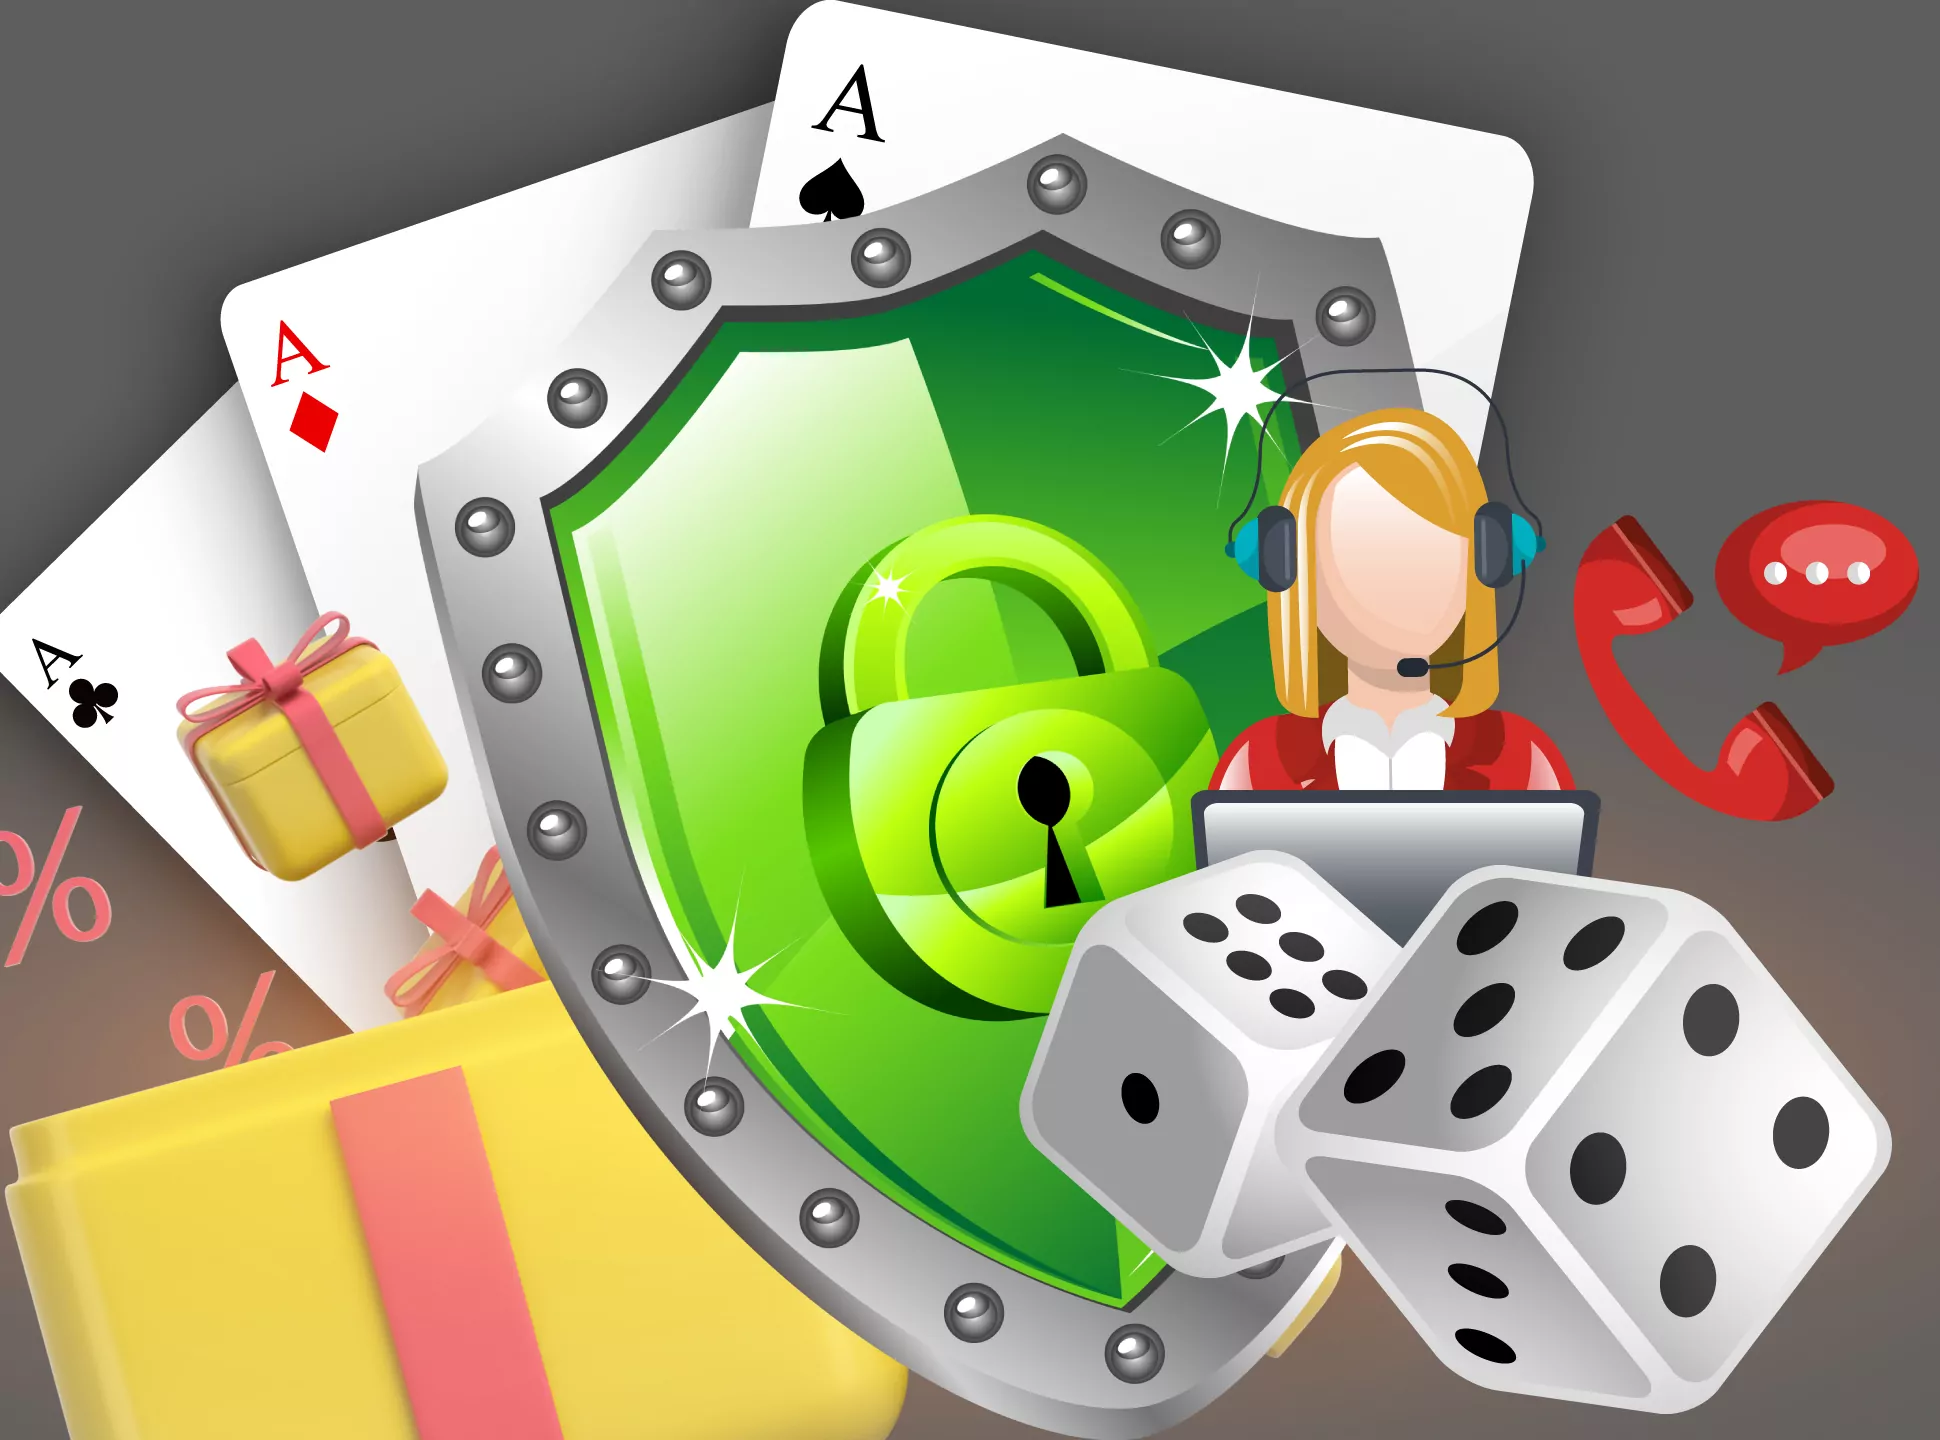 There are several criteria that we use to rate the casino apps.